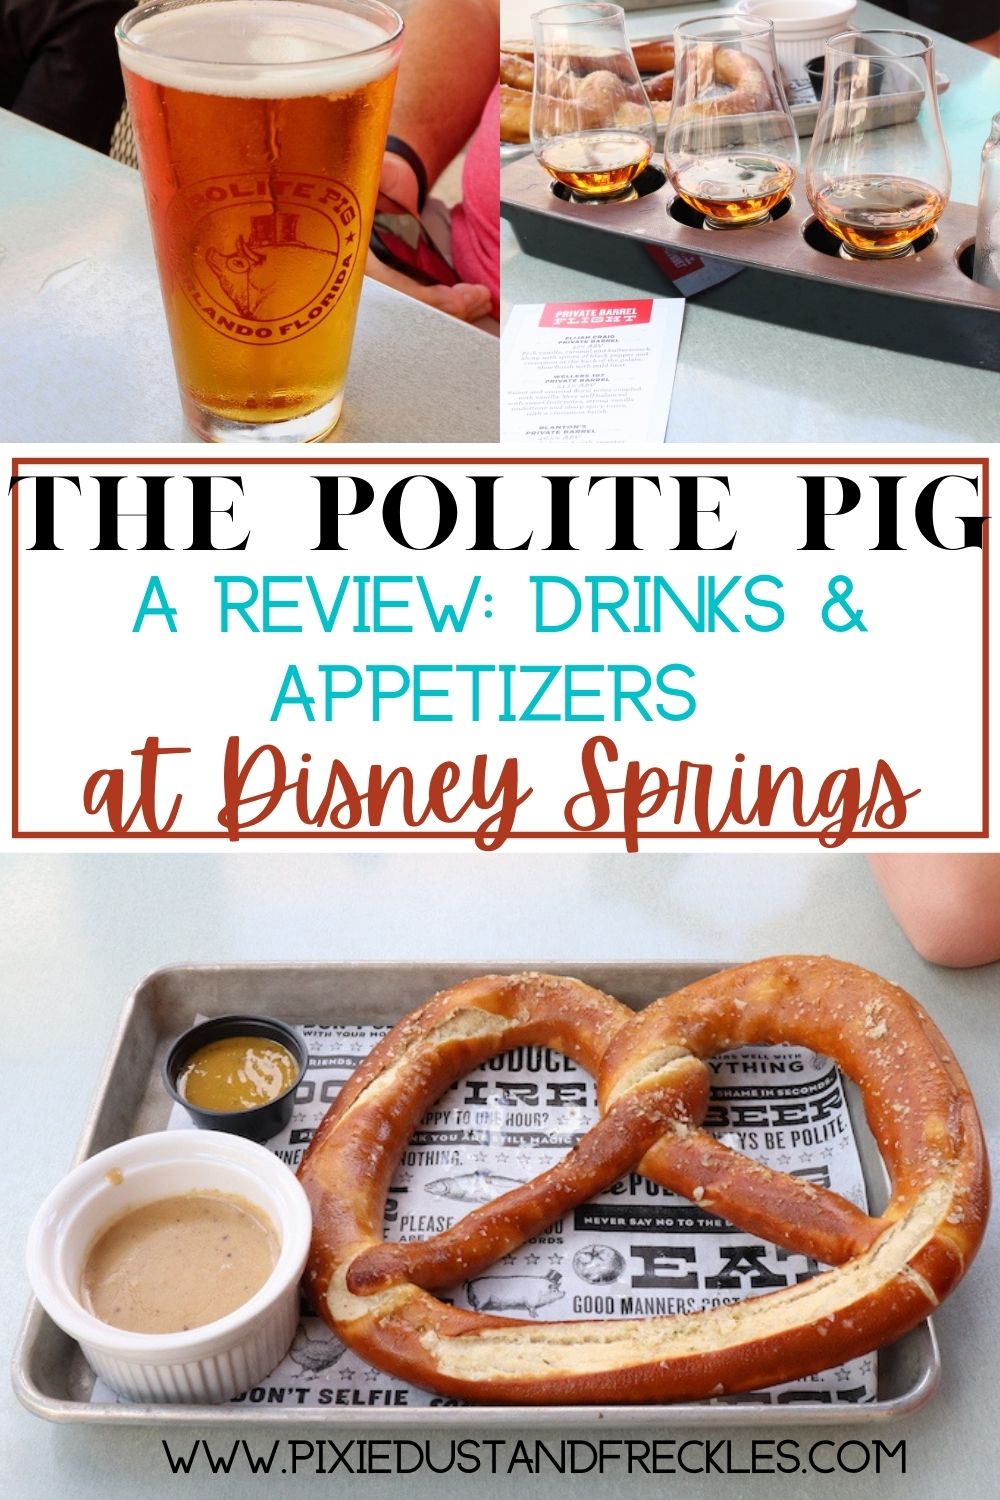 The Polite Pig, A Review: Drinks & Appetizers in Disney Springs